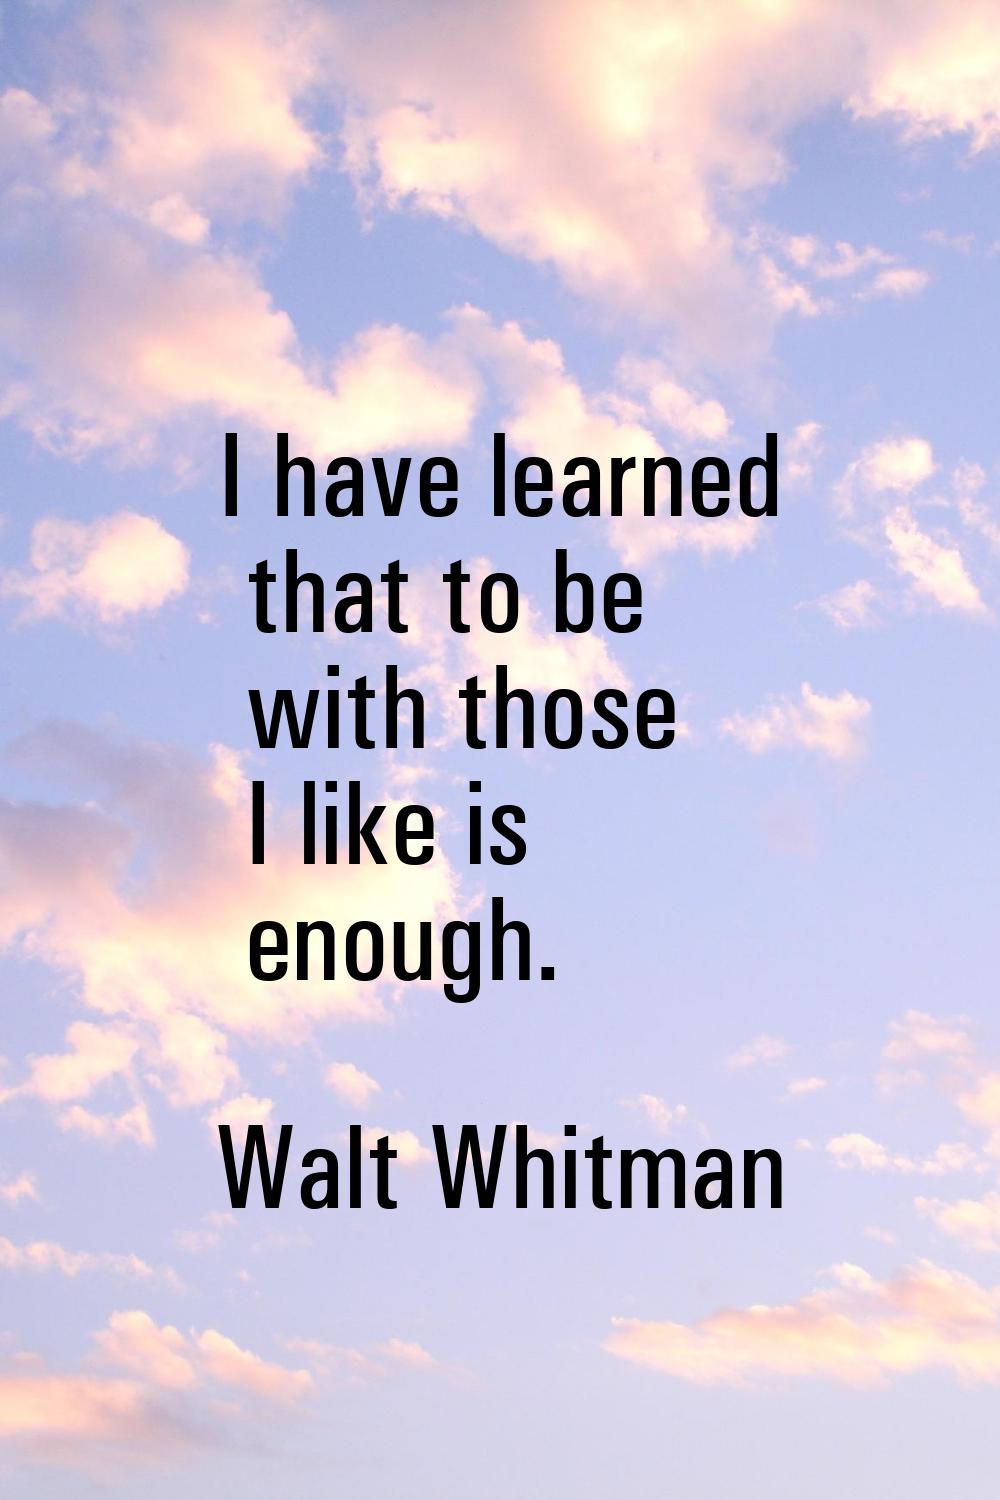 I have learned that to be with those I like is enough.